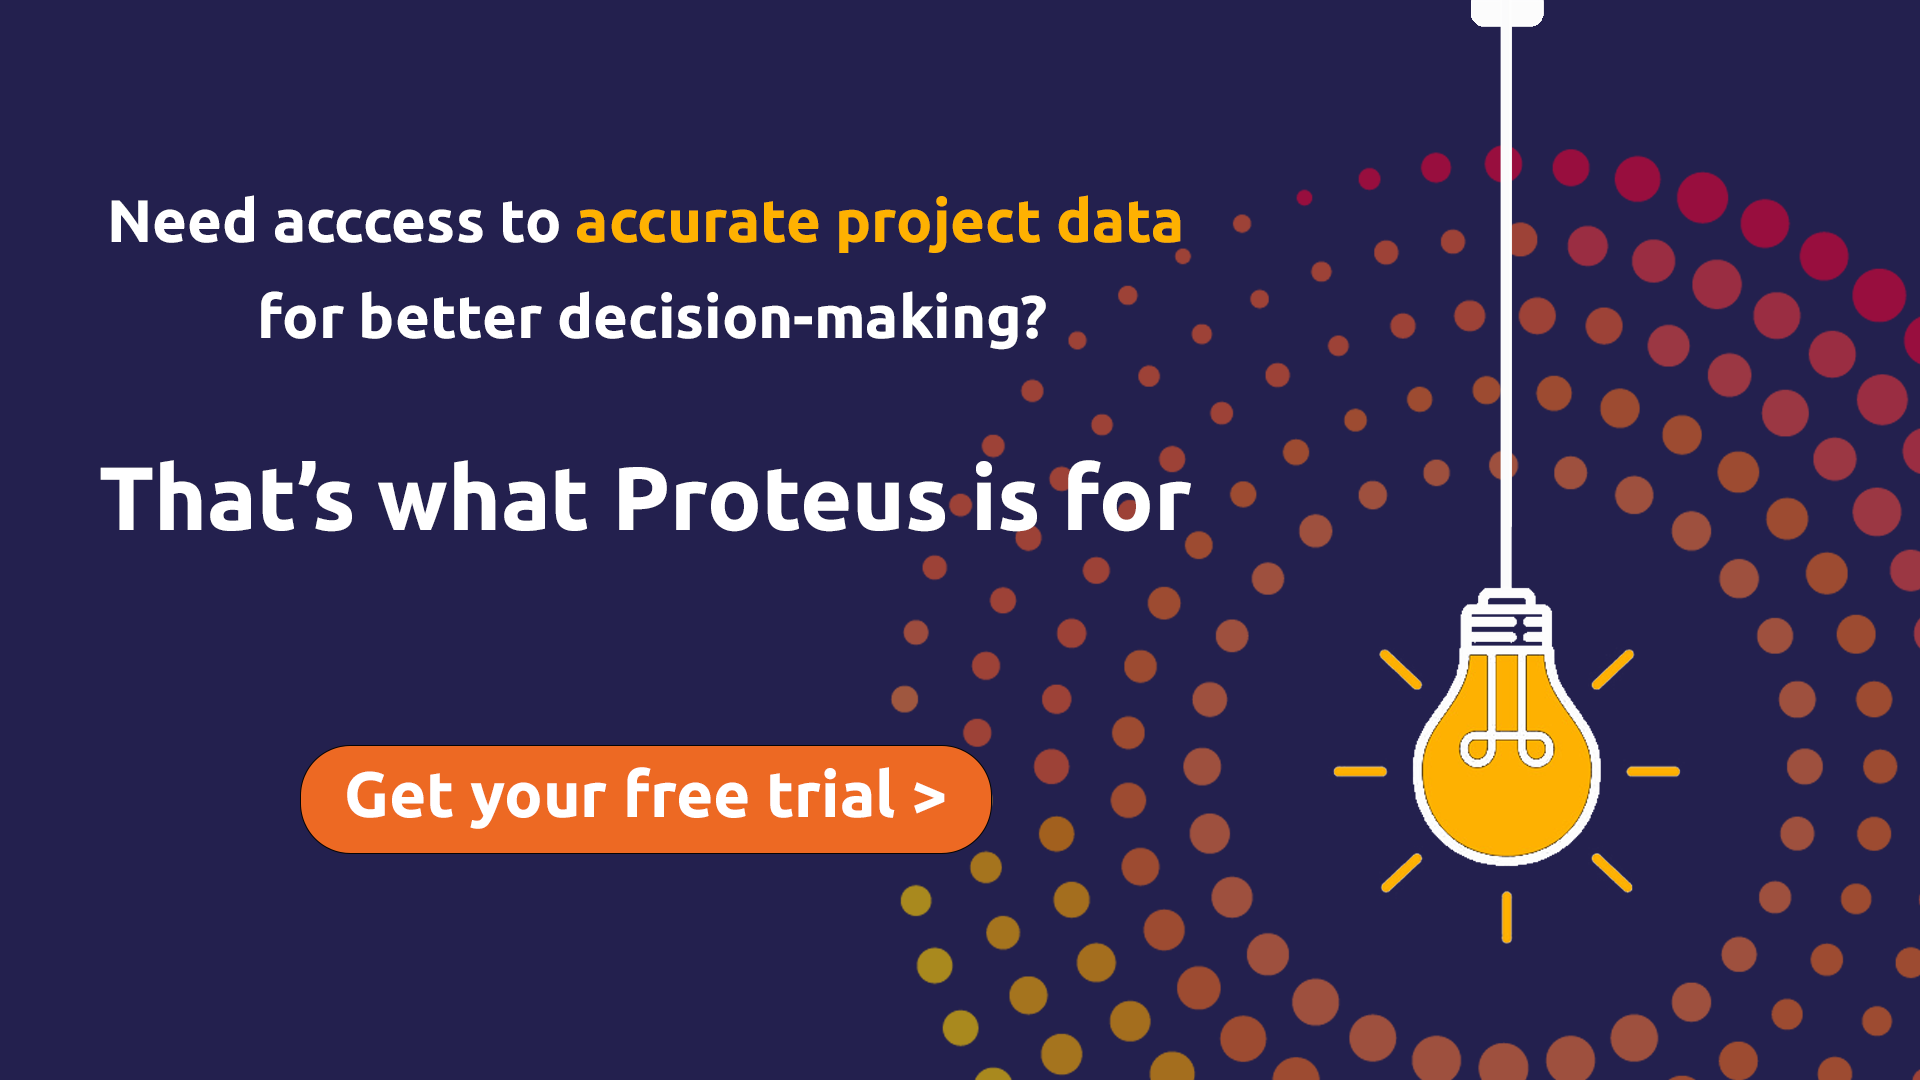 Get your free trial - Proteus project software